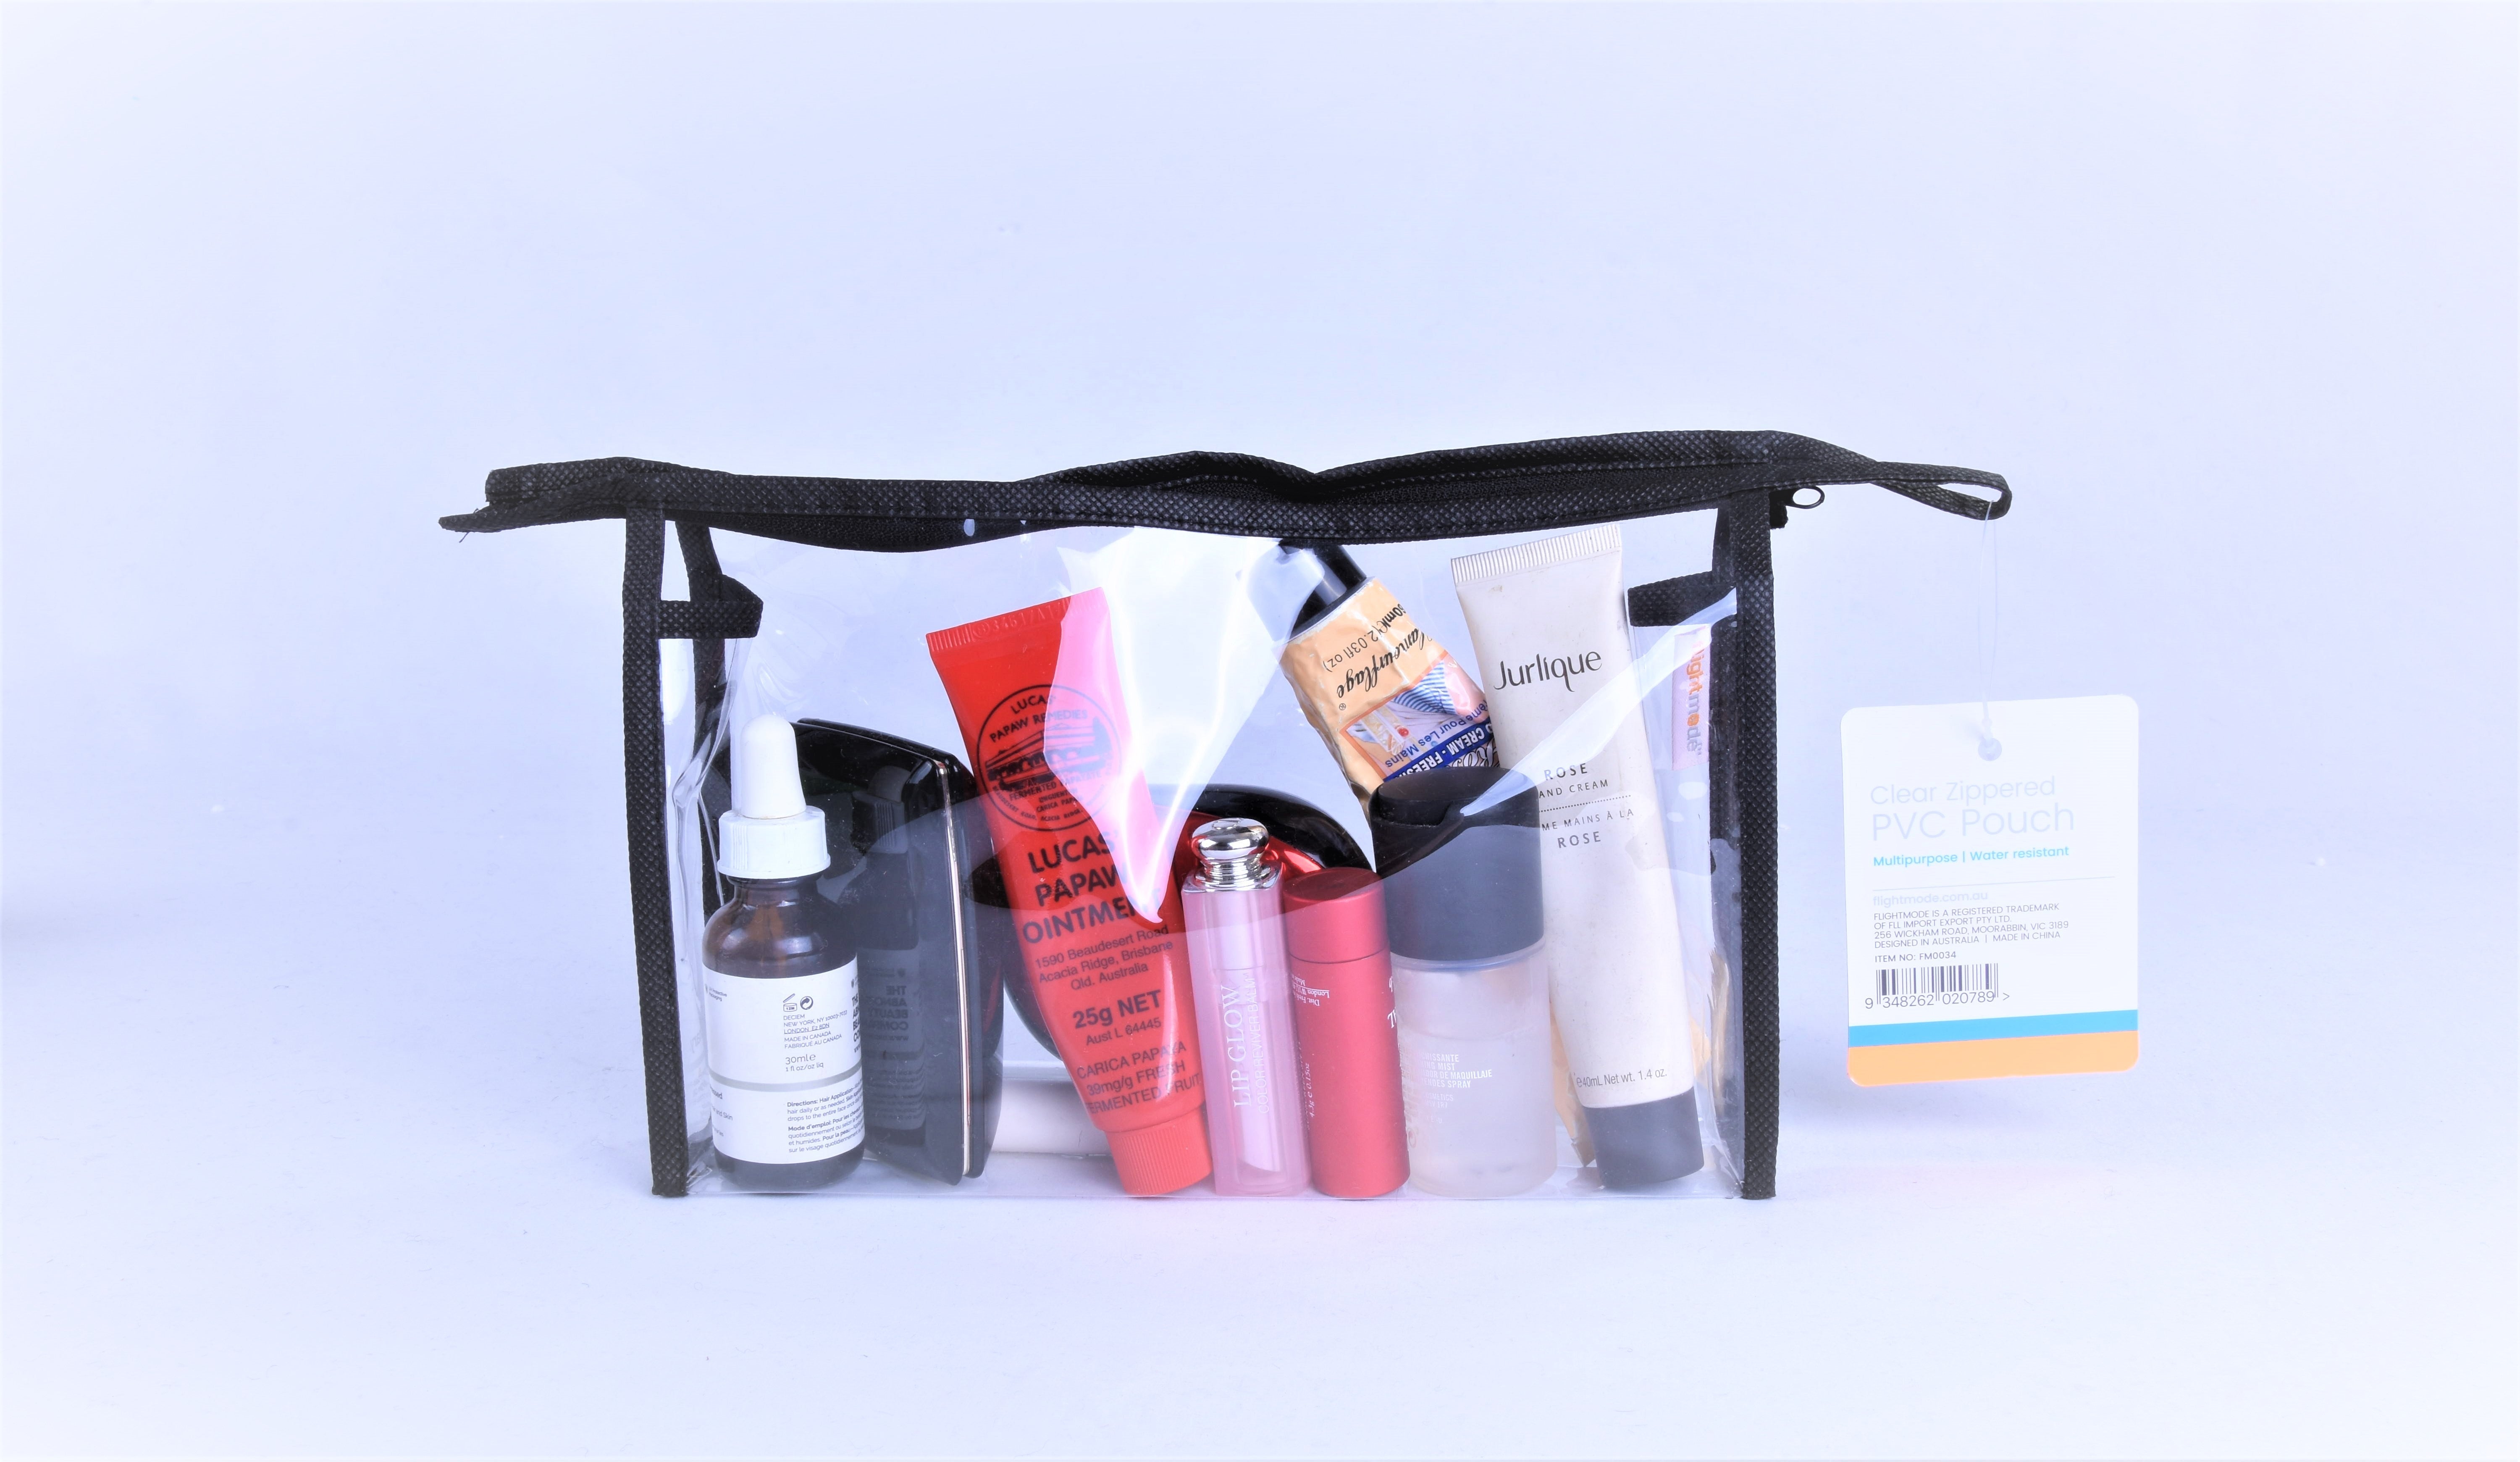 Transparent Clear Plastic Makeup Cosmetic Toiletry PVC Zipped Bag Travel Pouch